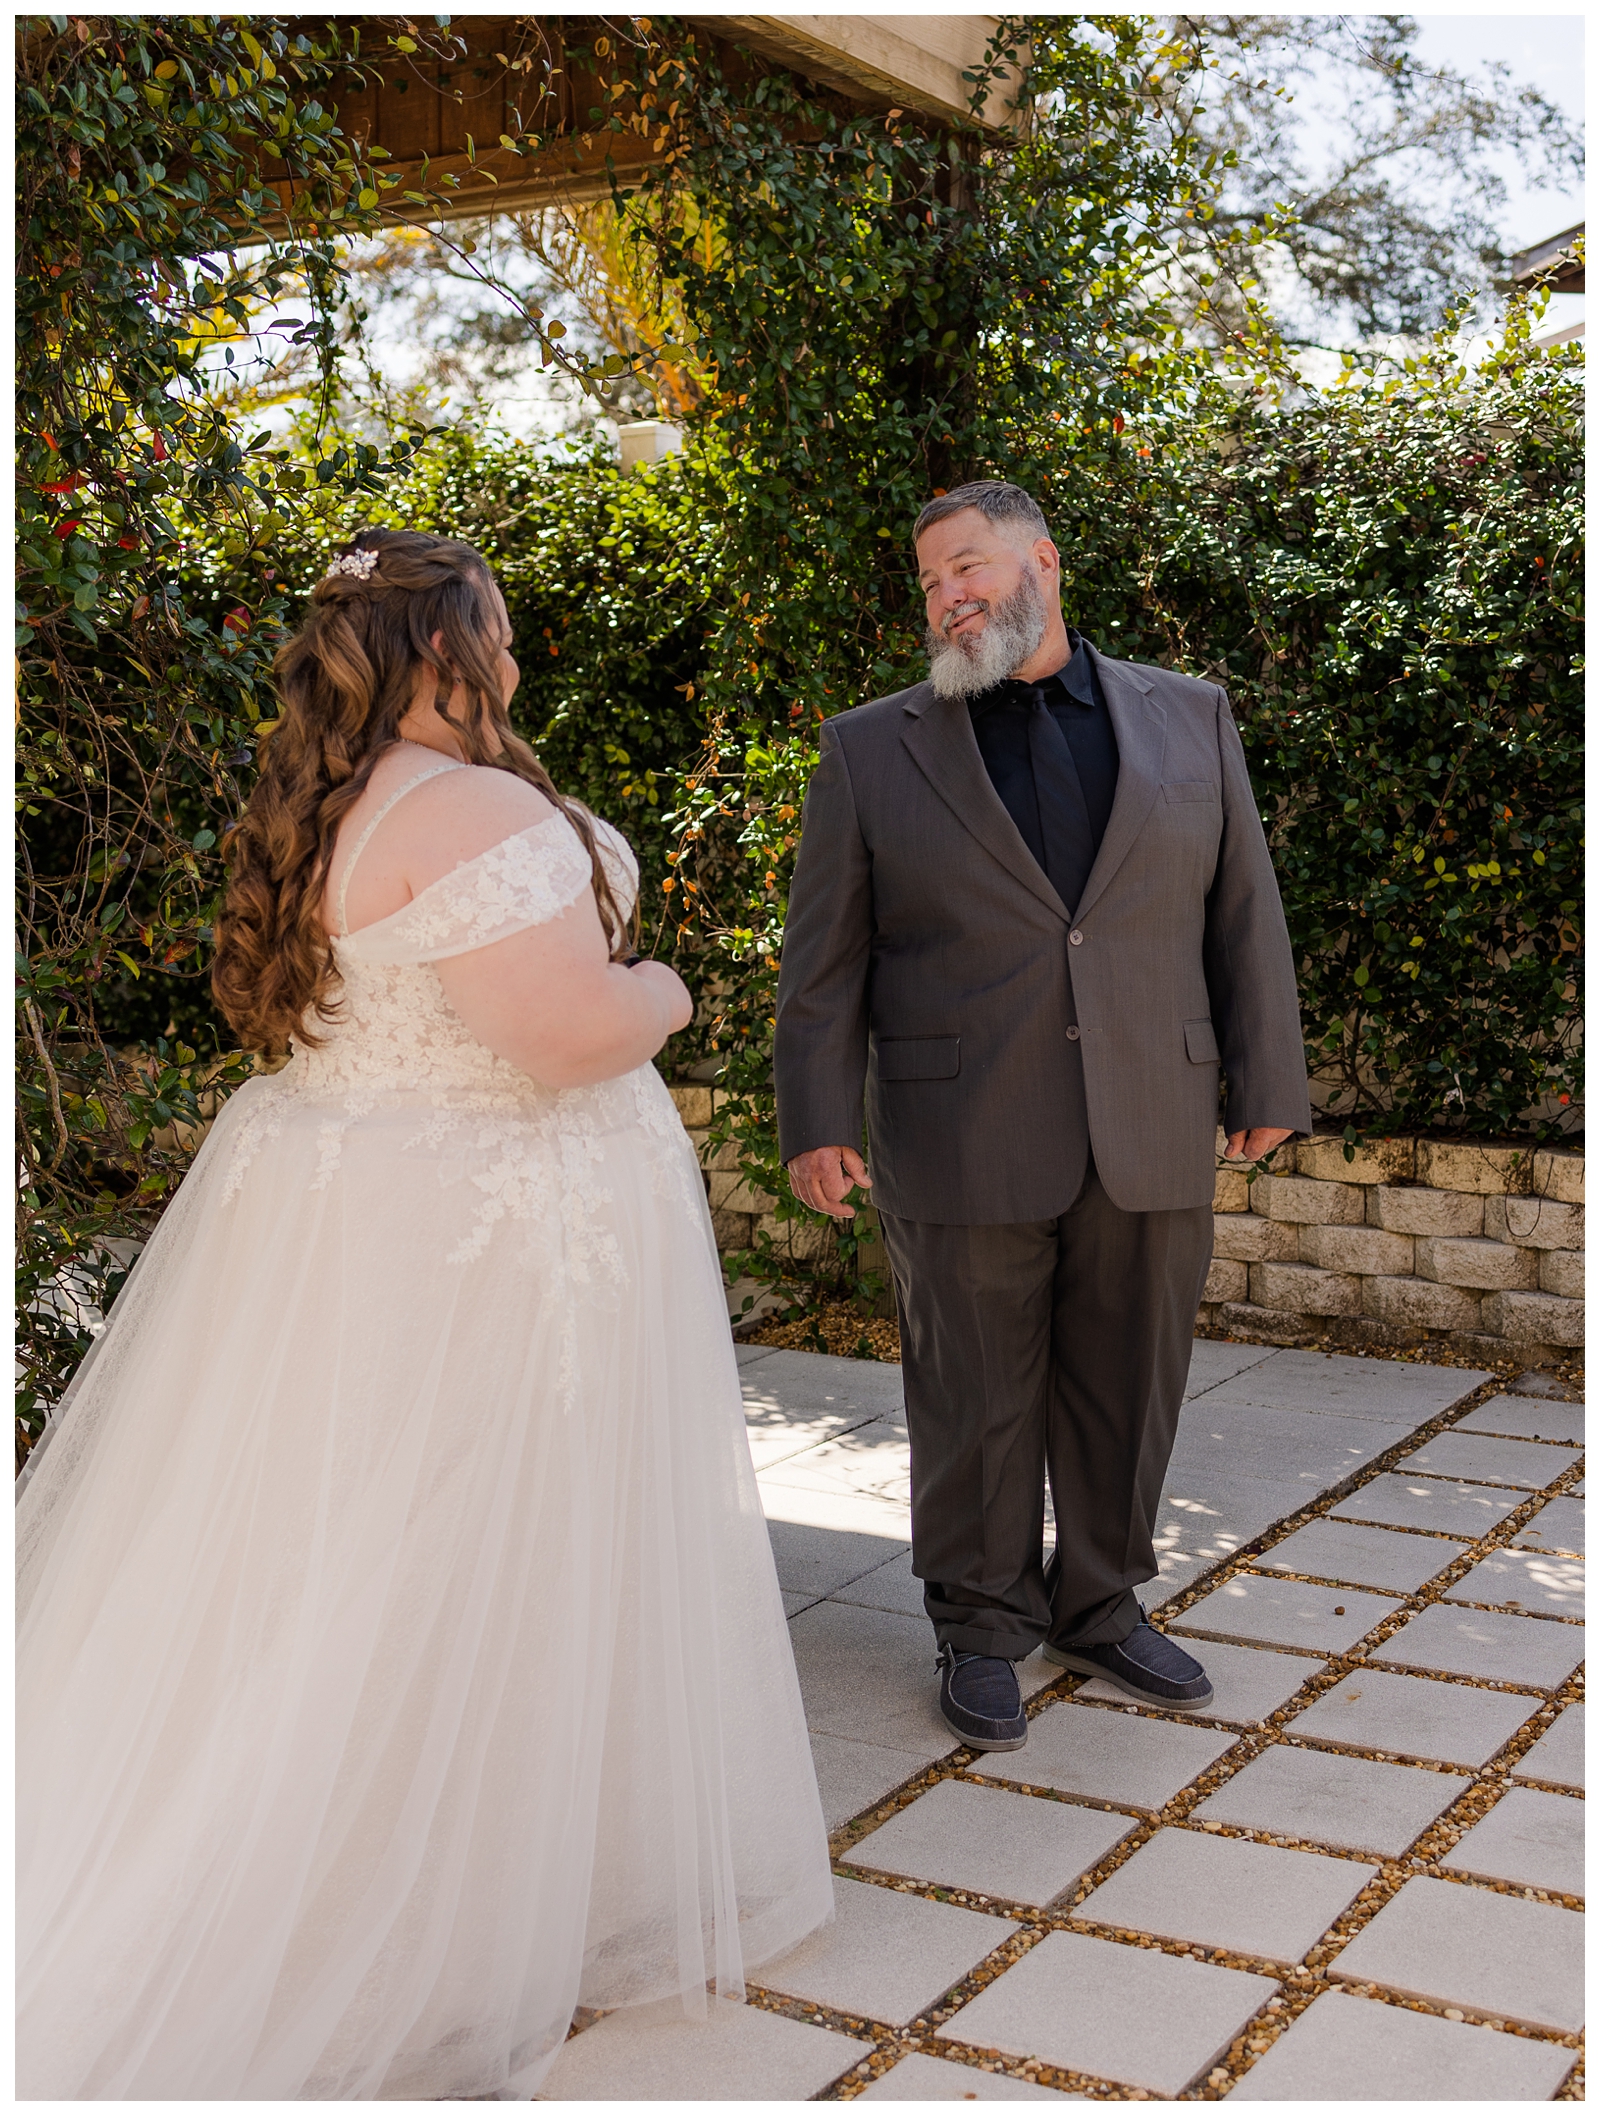 Father and daughter first look on wedding day